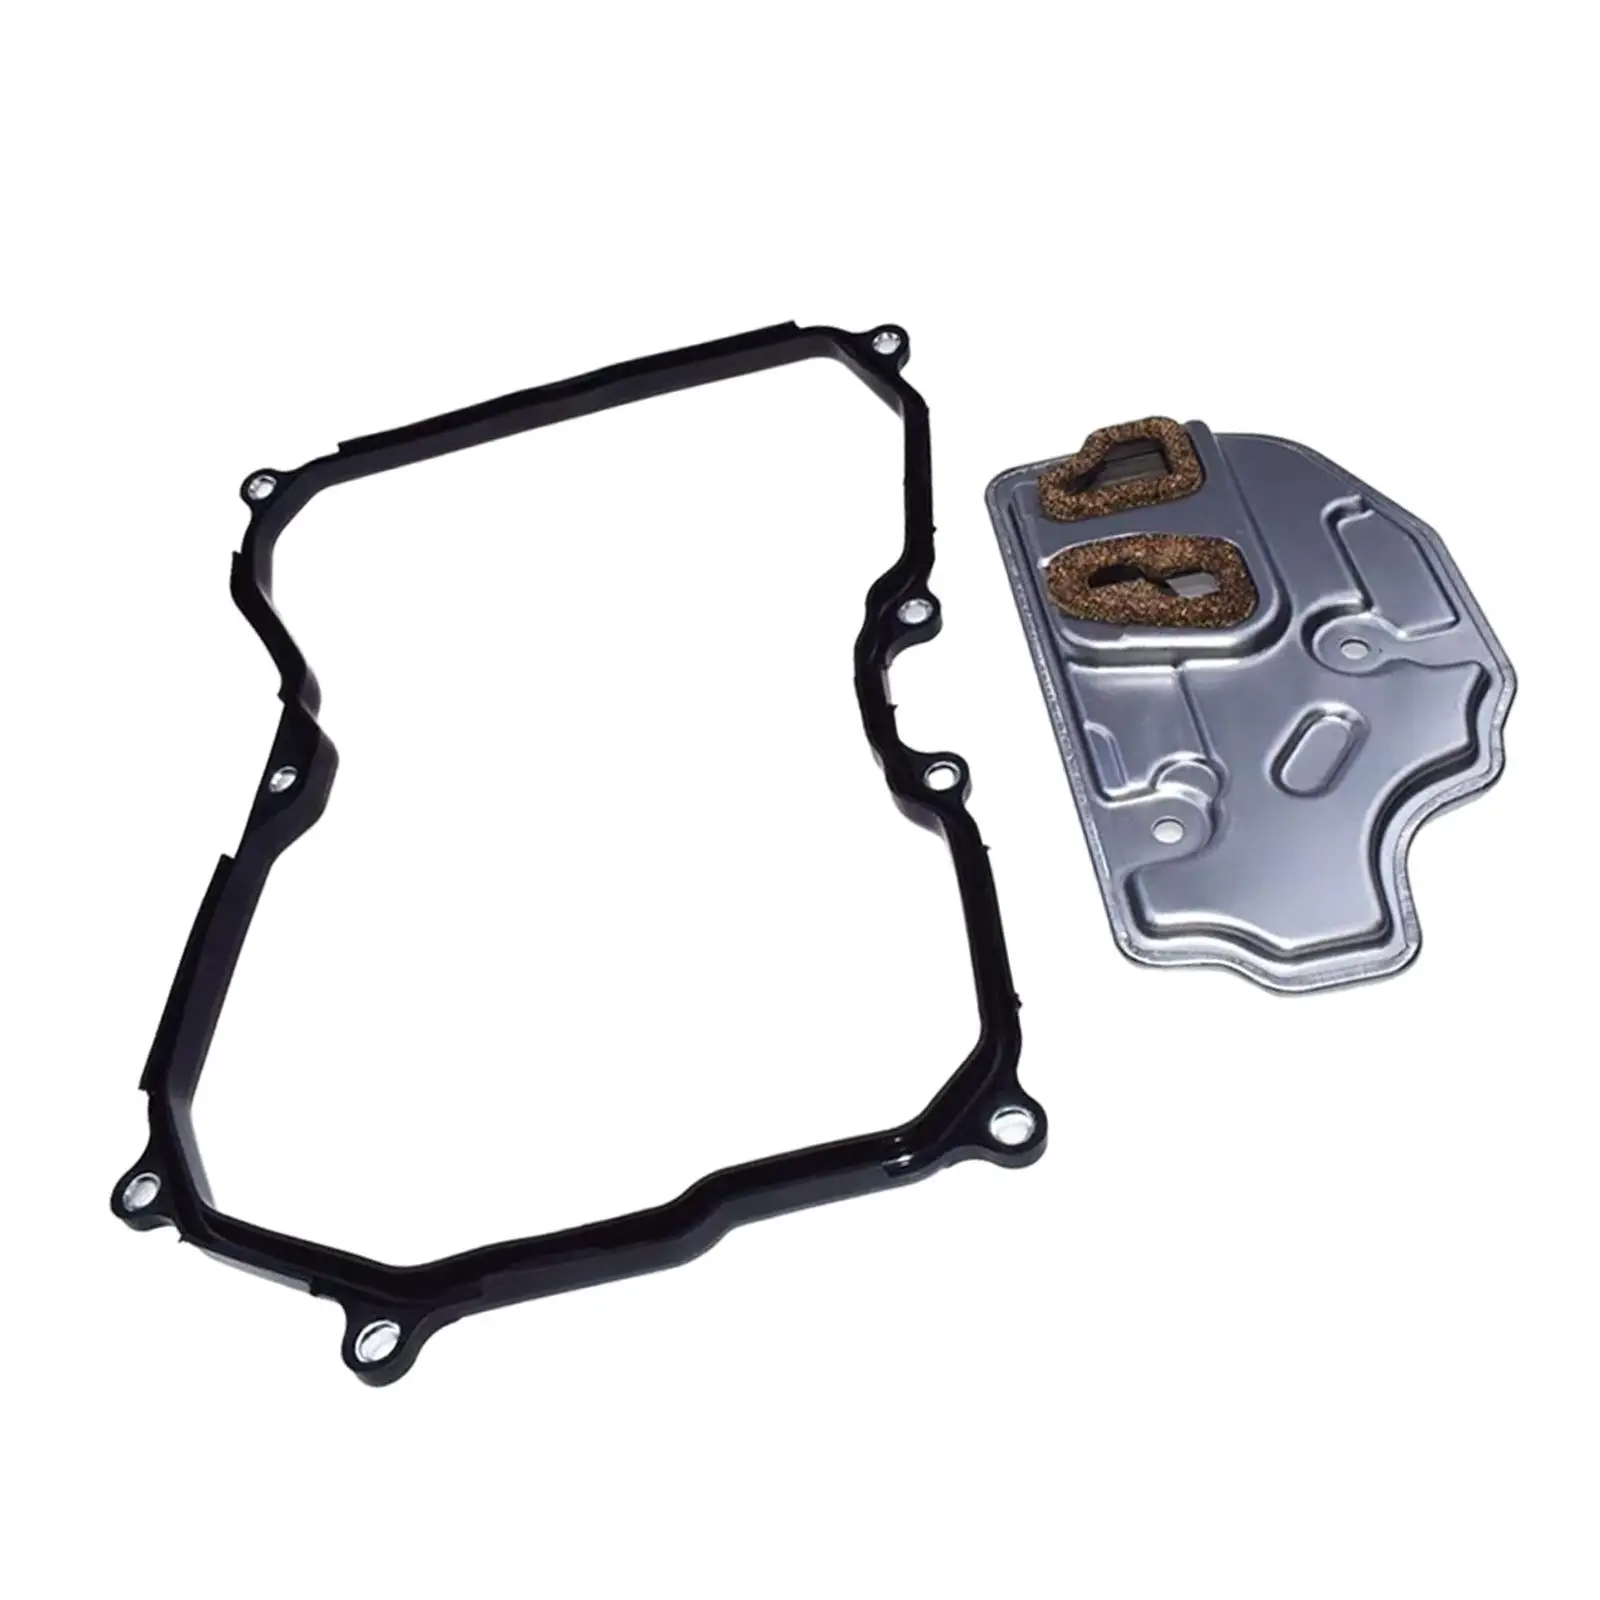 Transmission Oil Filter & Gasket 09G 321 370 for B6 cc Replaces